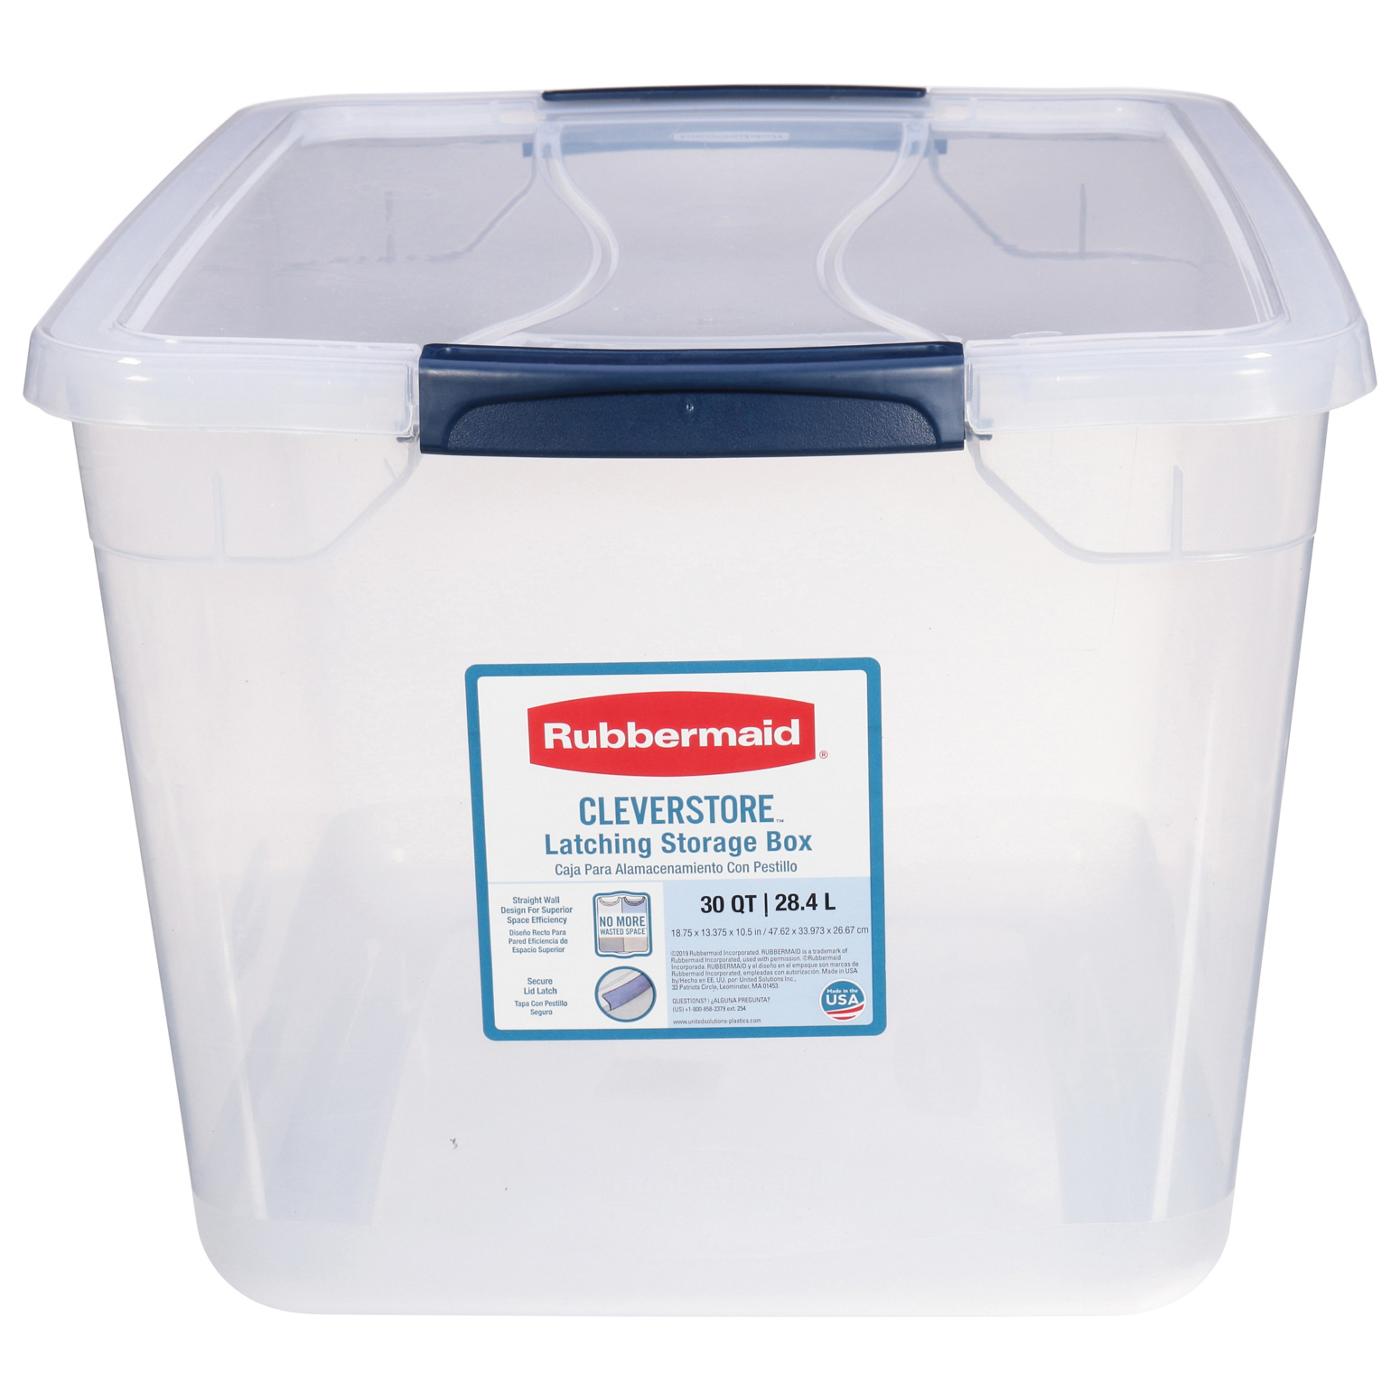 Rubbermaid Cleverstore Clear Latching Storage Box; image 1 of 3